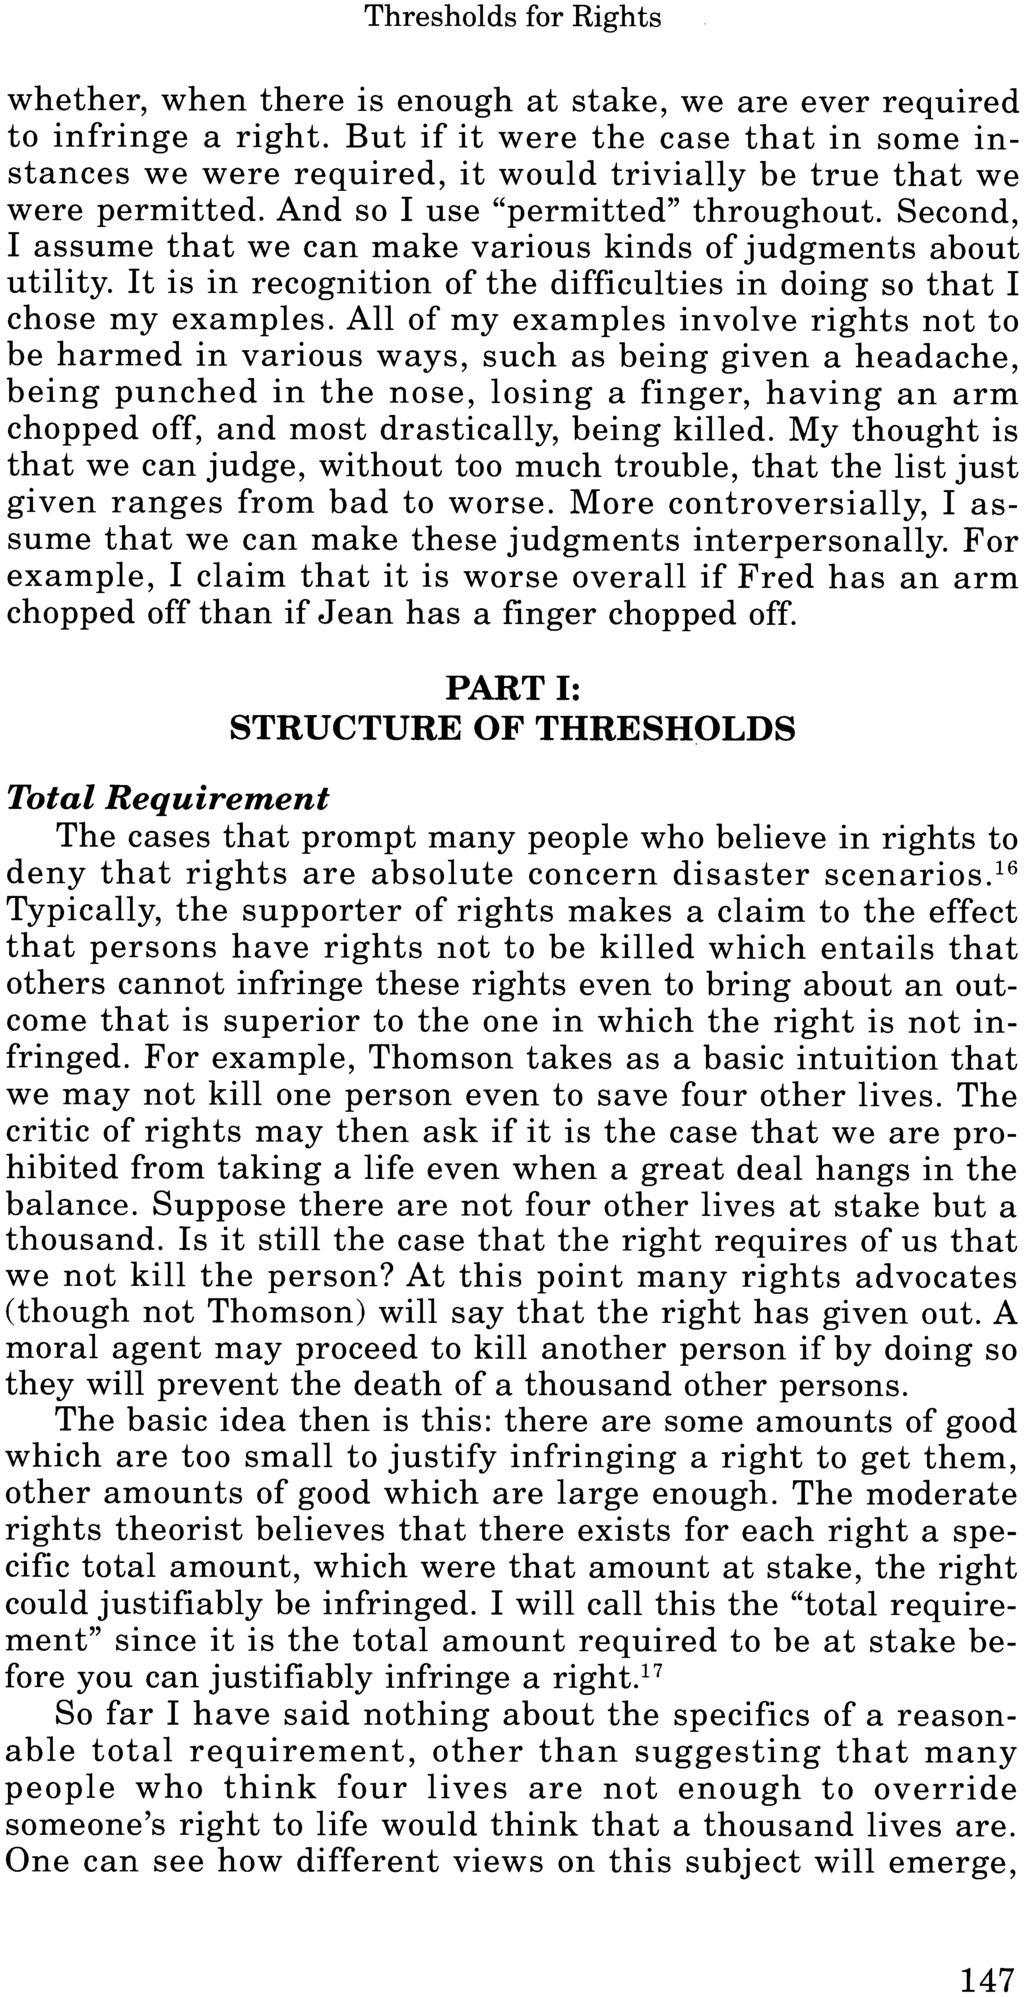 Thresholds for Rights whether, when there is enough at stake, we are ever required to infringe a right.